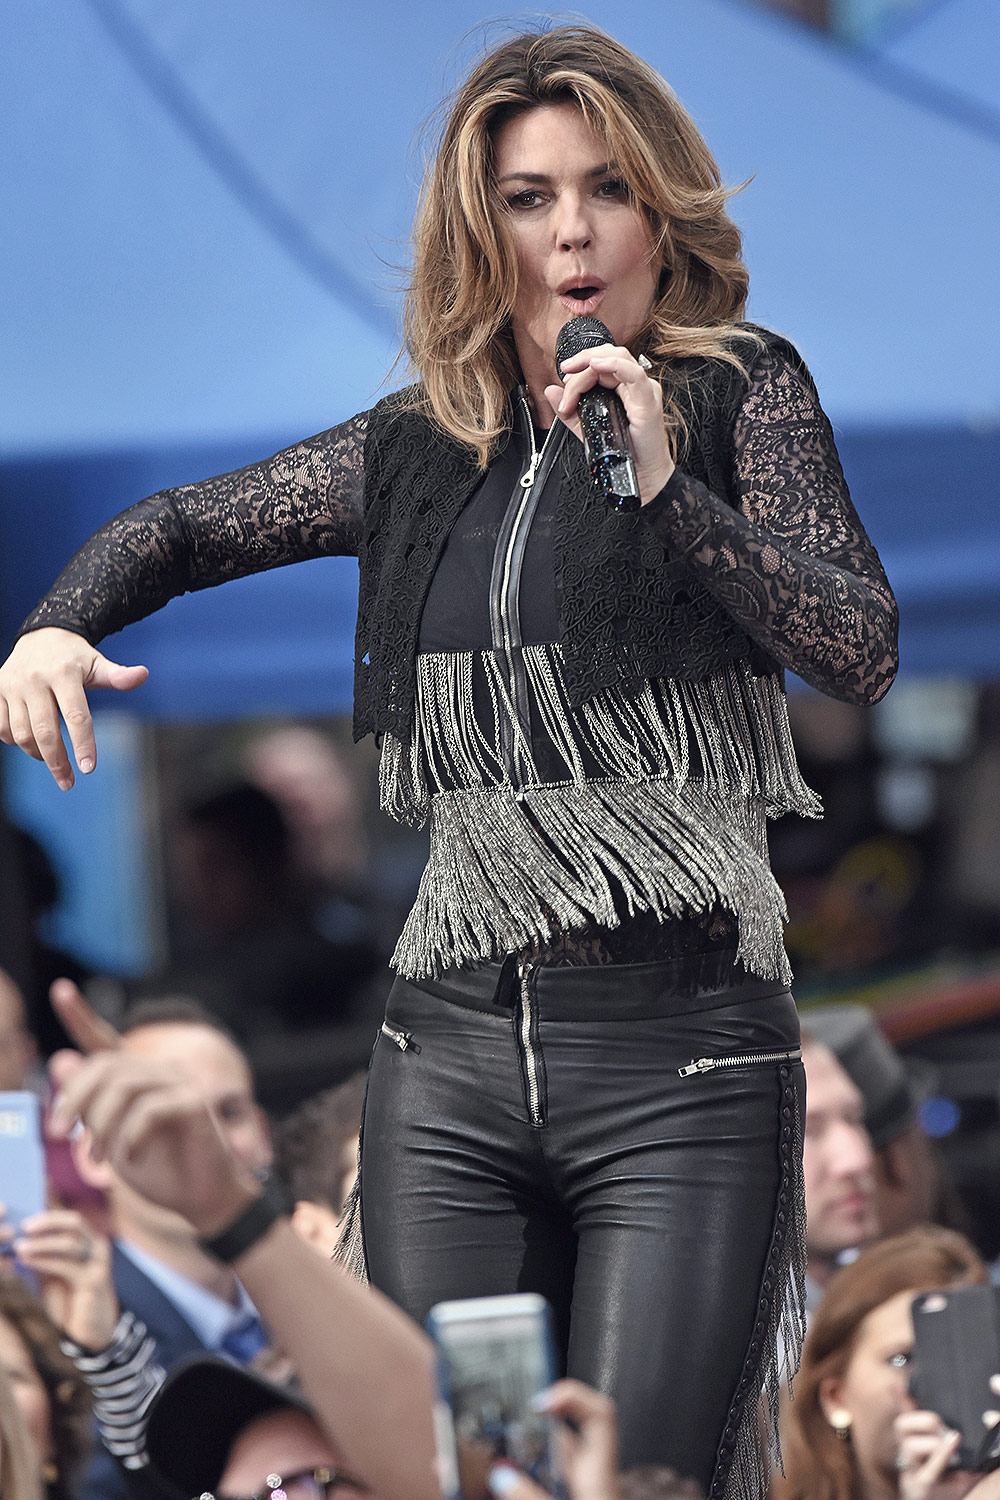 Shania Twain performs at Today show